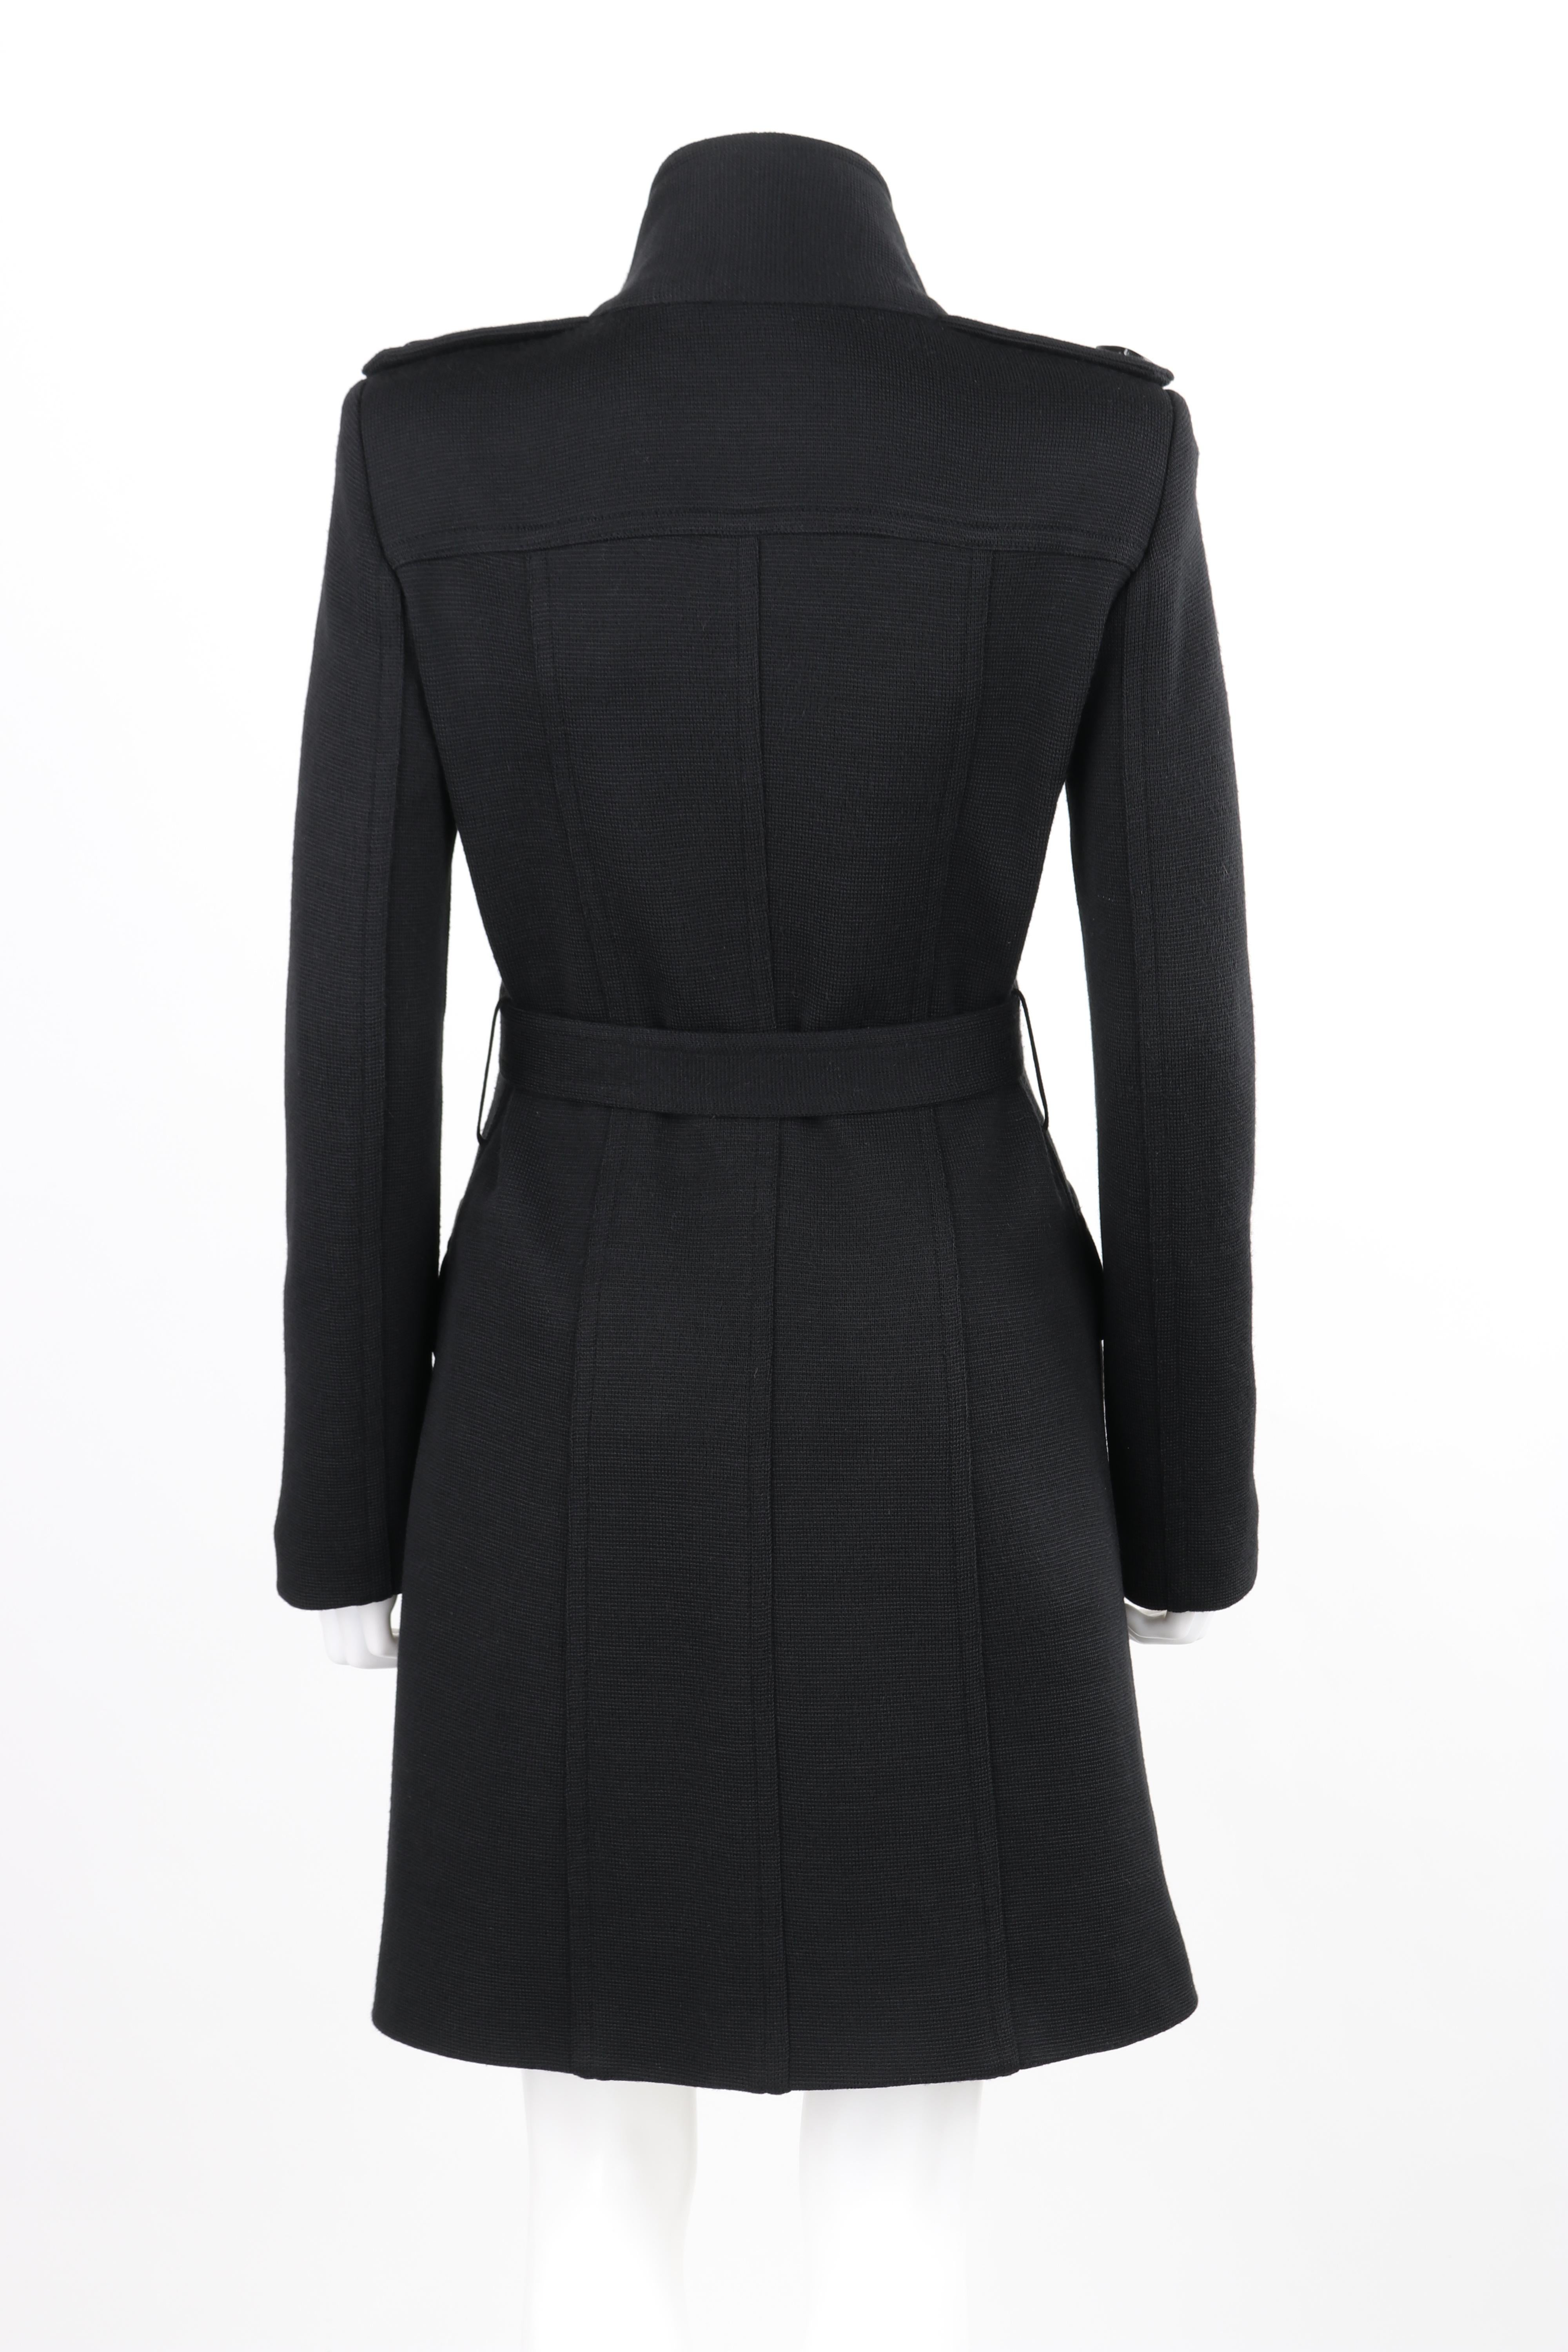 ALEXANDER McQUEEN c.1996 Black Belted Structured Double Breasted Overcoat Coat In Good Condition For Sale In Thiensville, WI